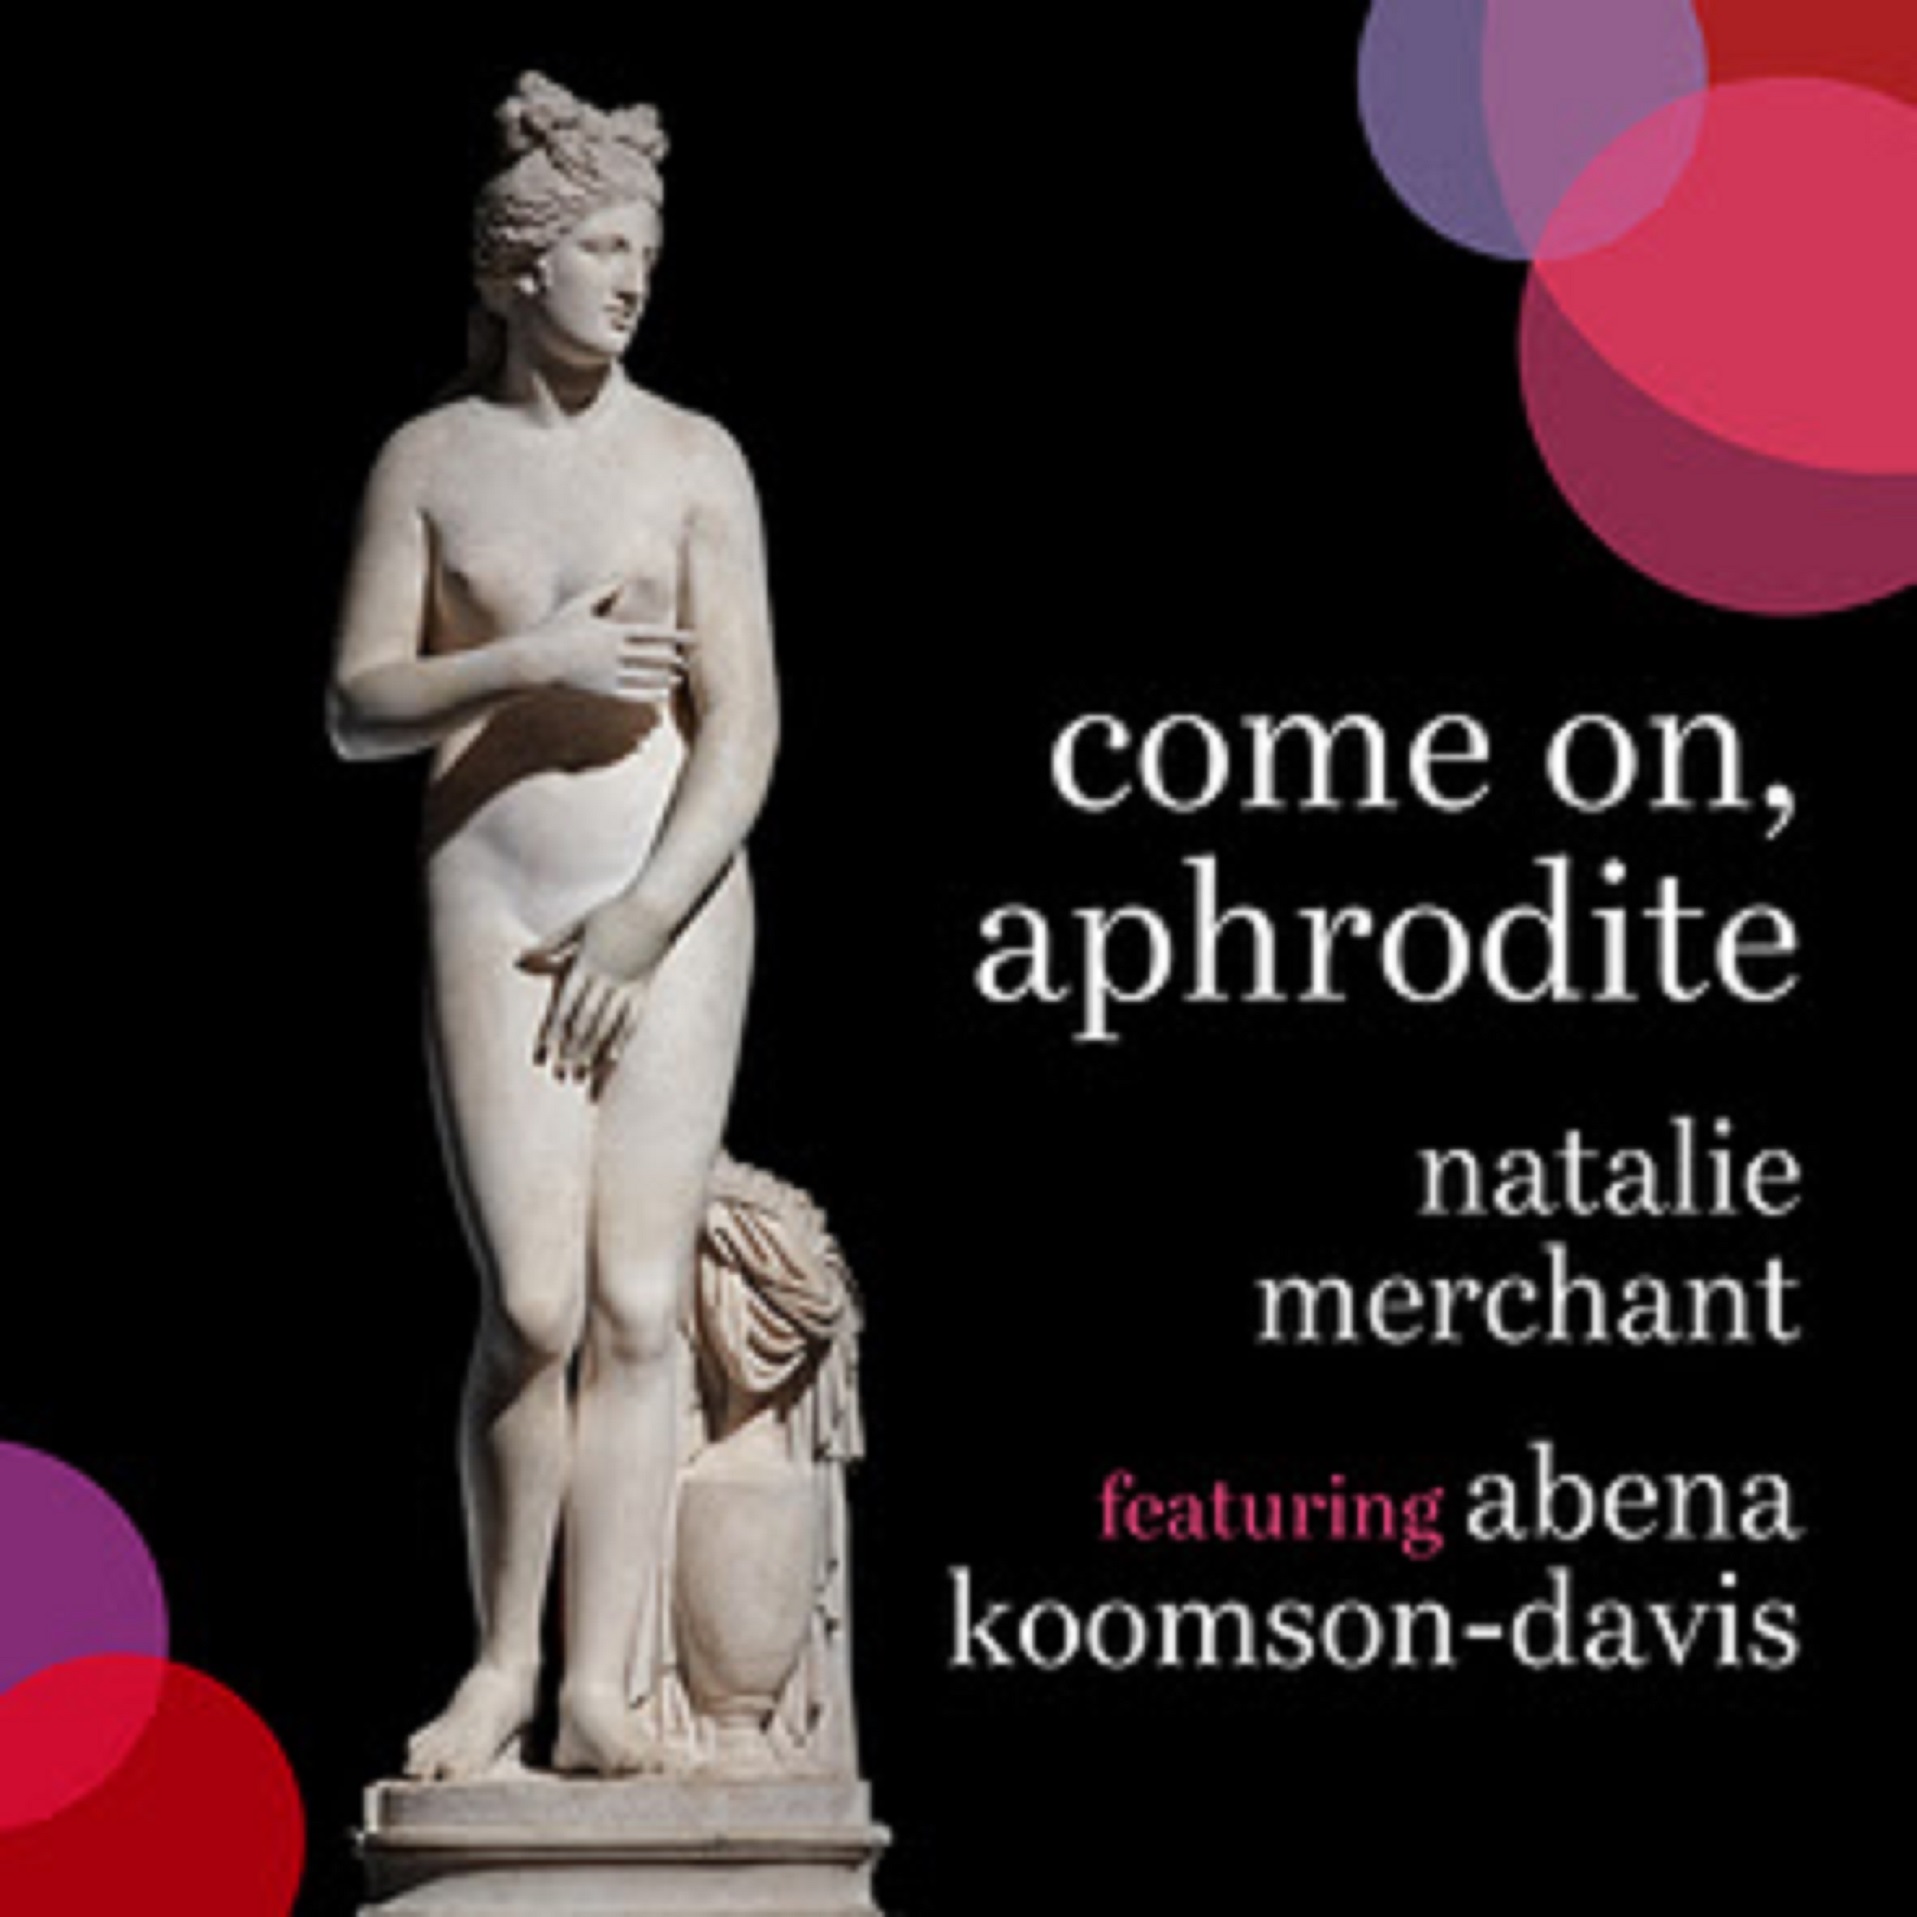 New video for Natalie Merchant's single “Come On, Aphrodite” out now